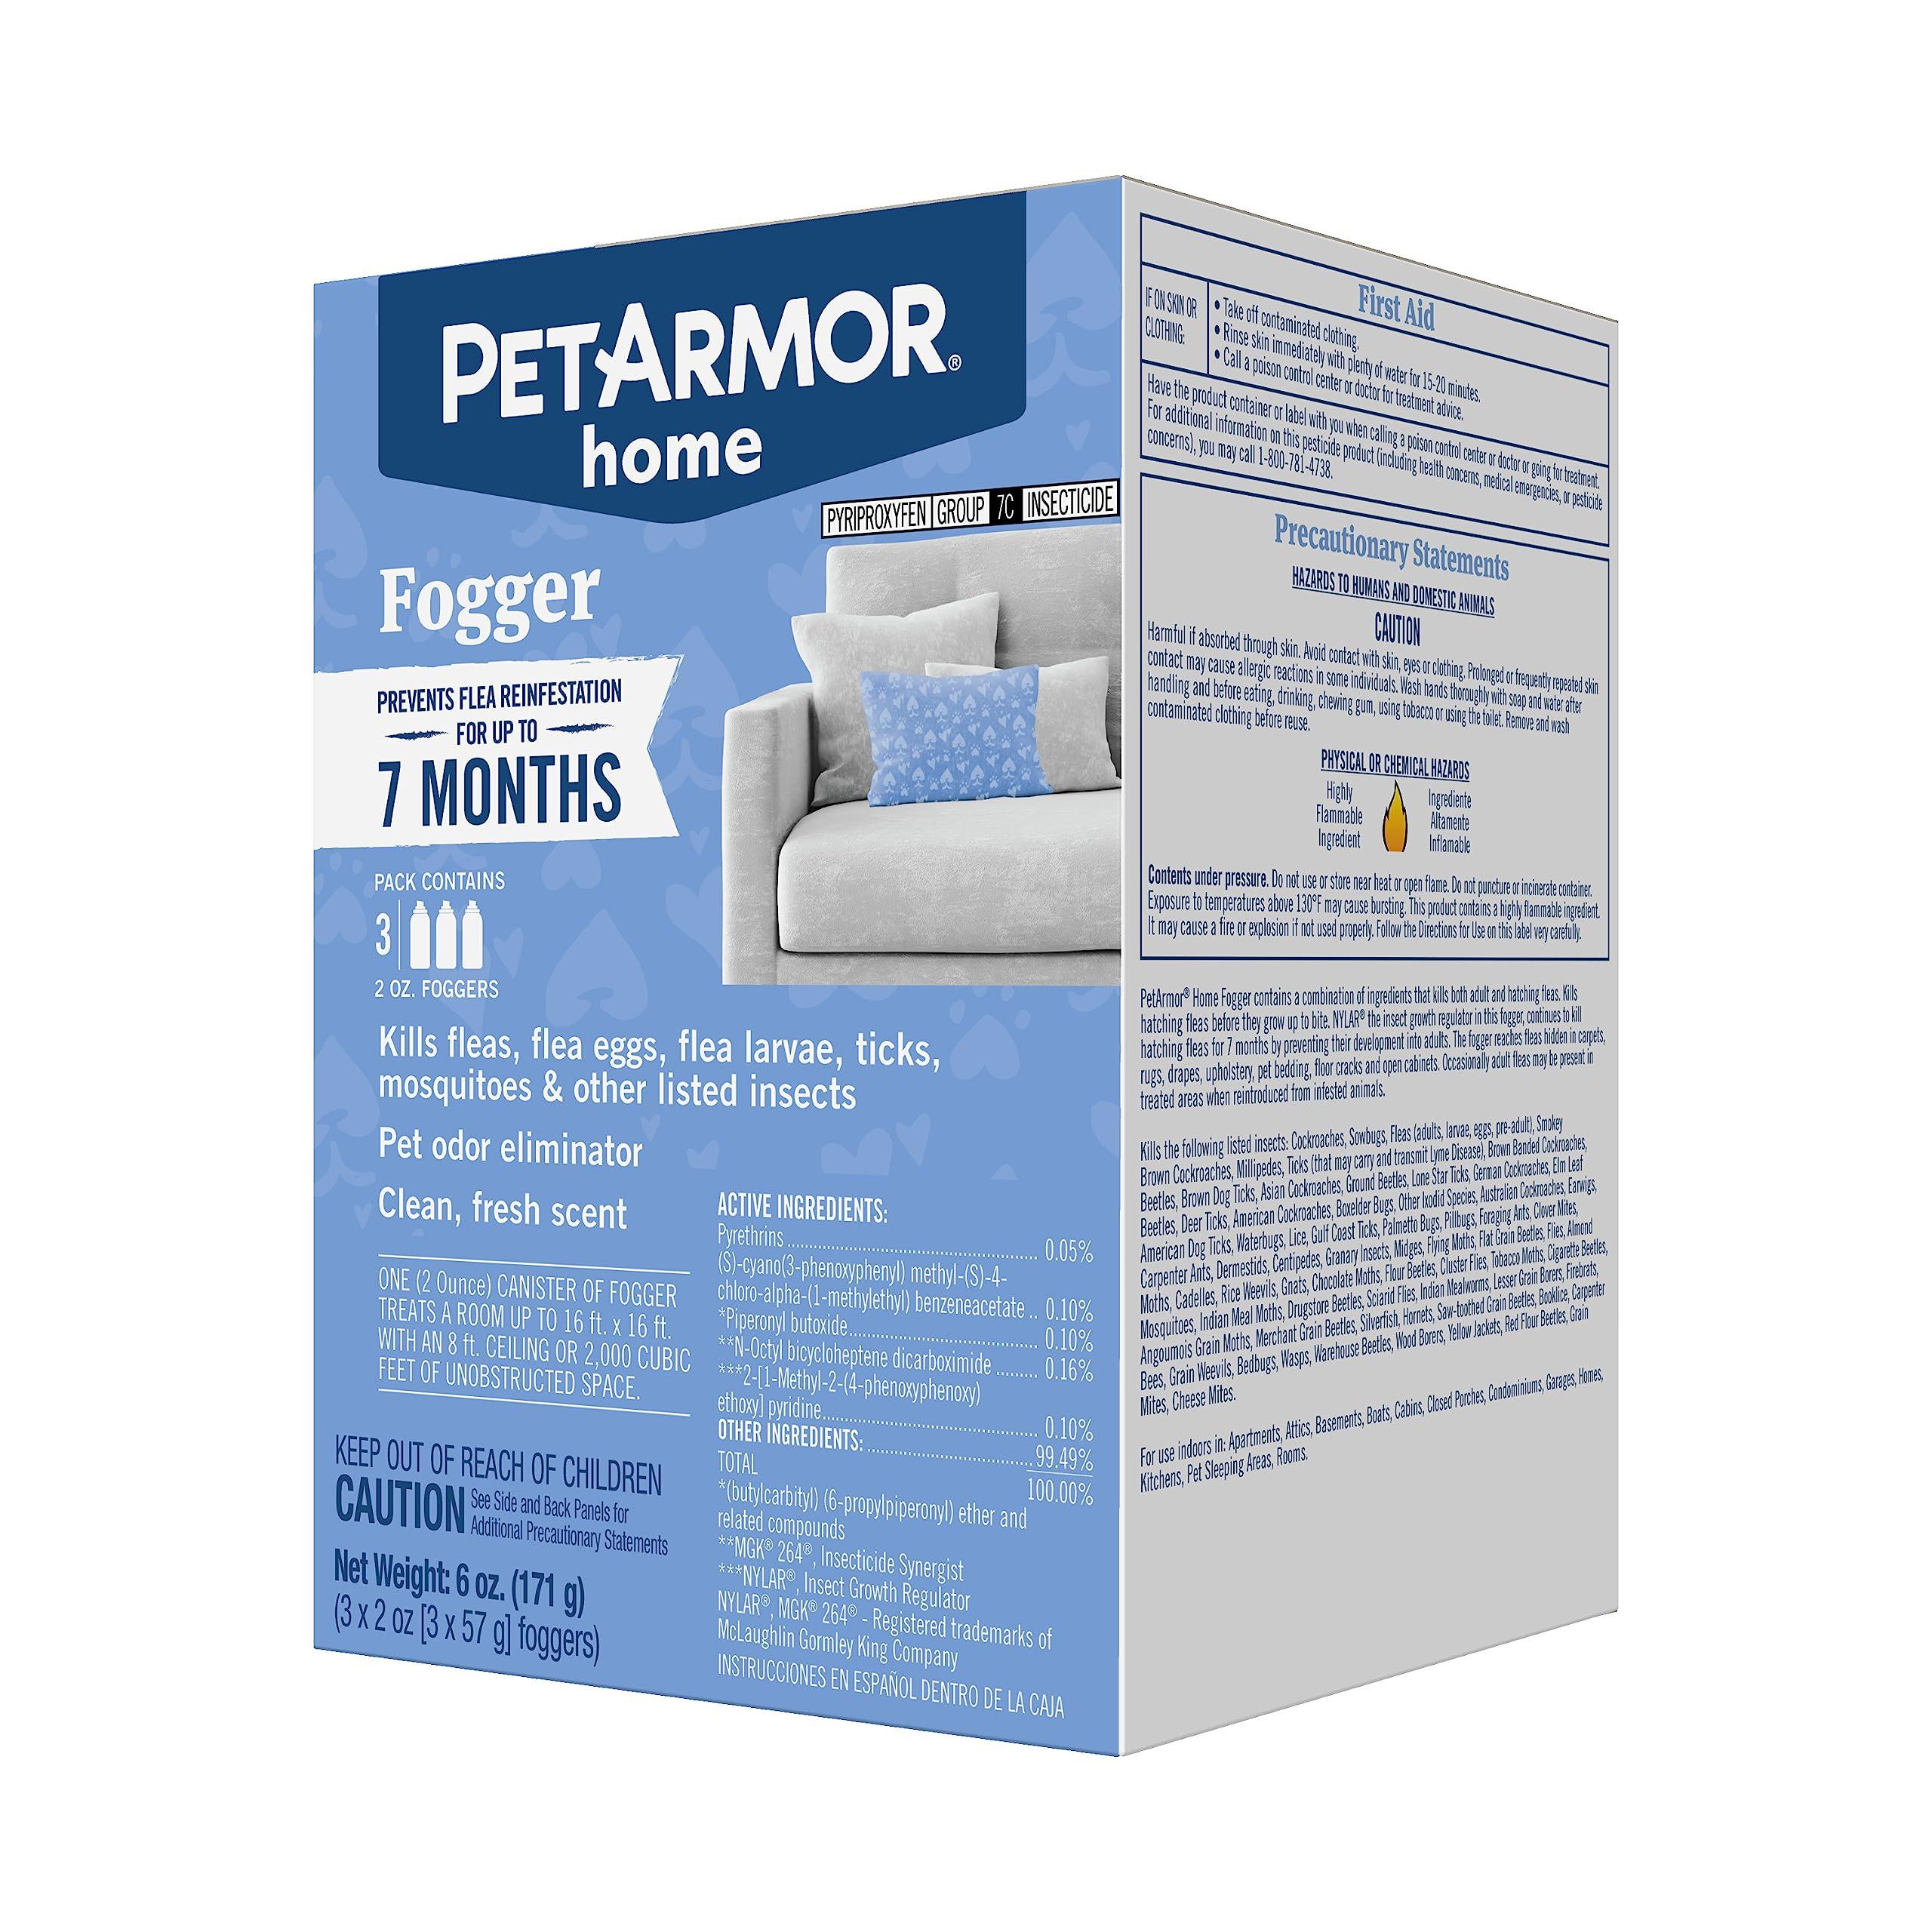 PetArmor Home Fogger, Kills Fleas, Ticks, Mosquitoes & Other Listed Insects, Helps Eliminate Pet Odor, Clean Fresh Scent, Protects for 7 Months, 3 2oz Canisters